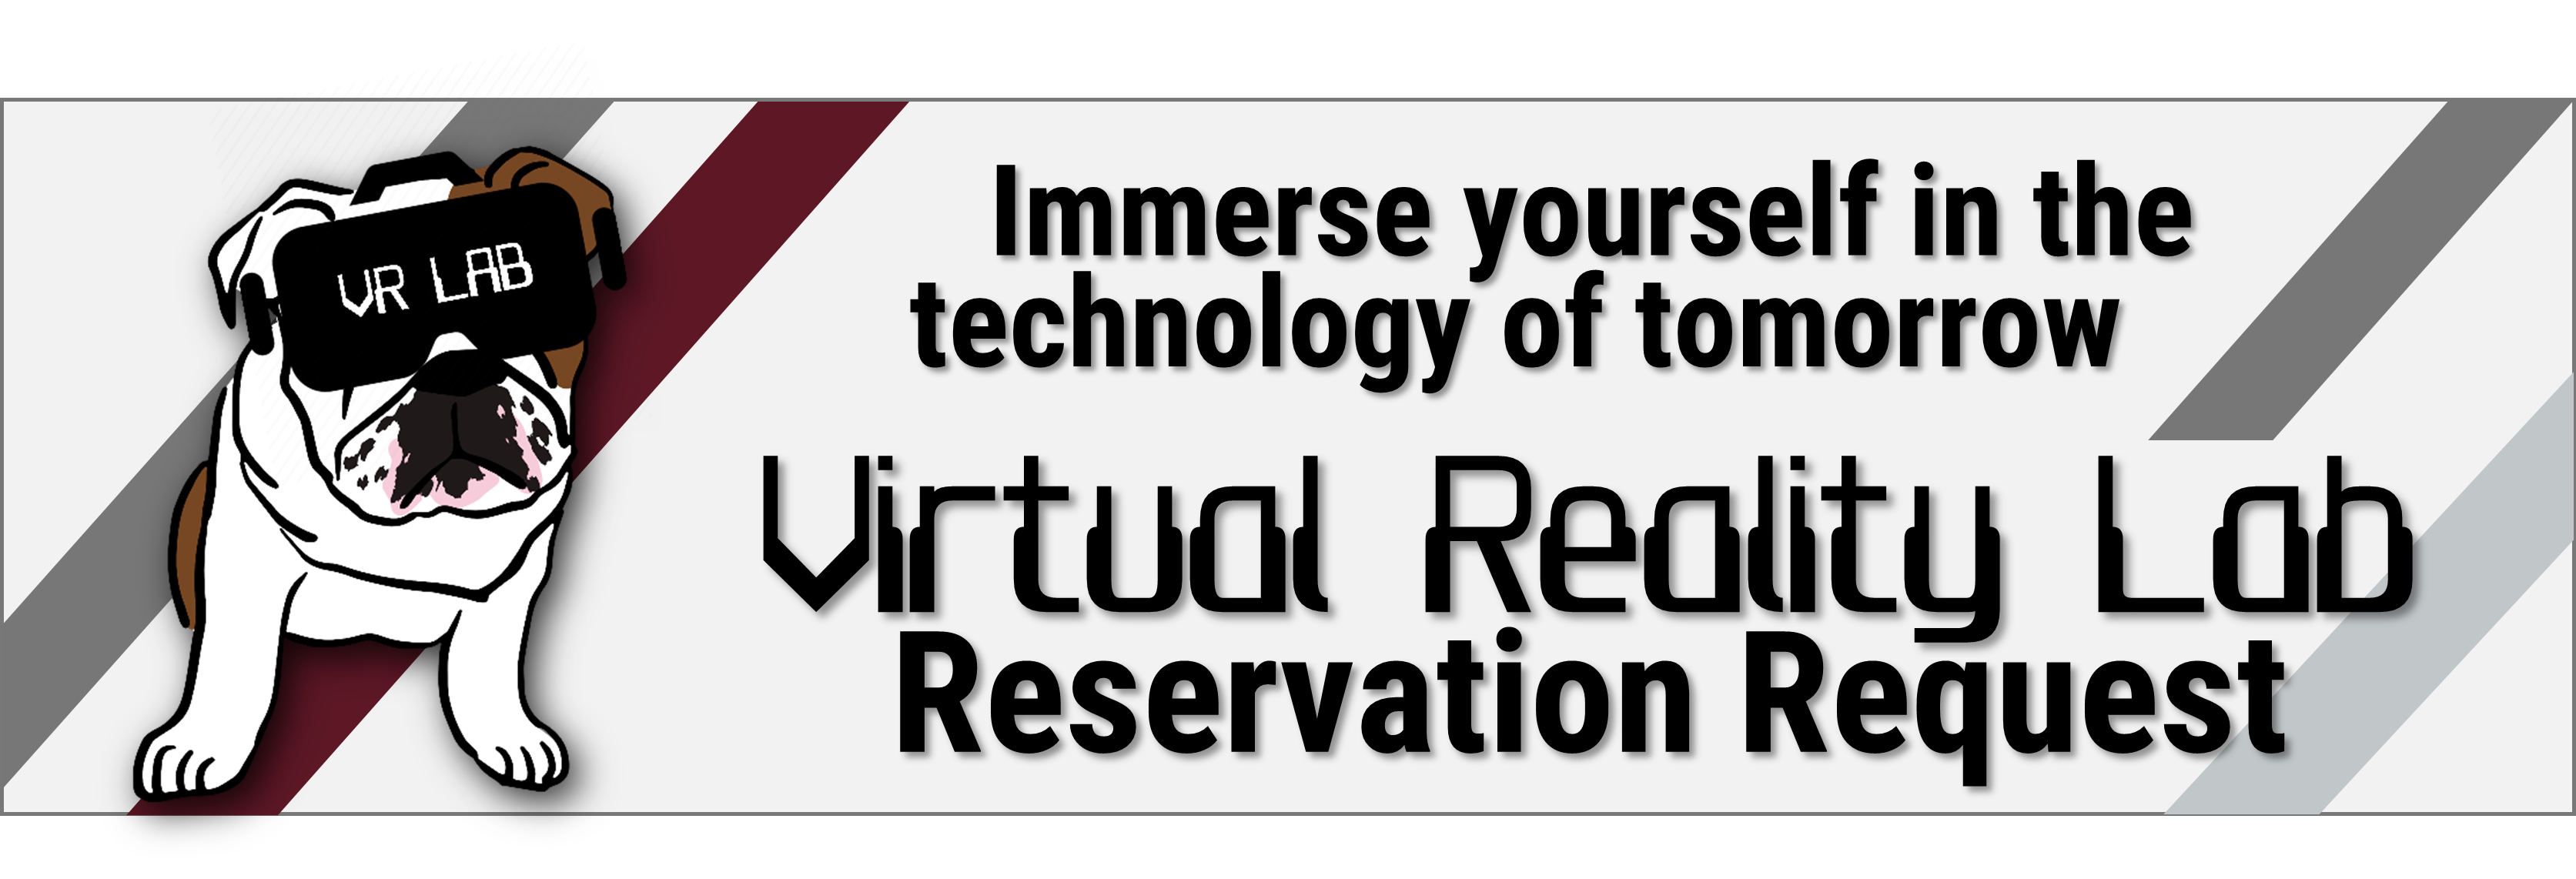 Virtual Reality Lab Reservation